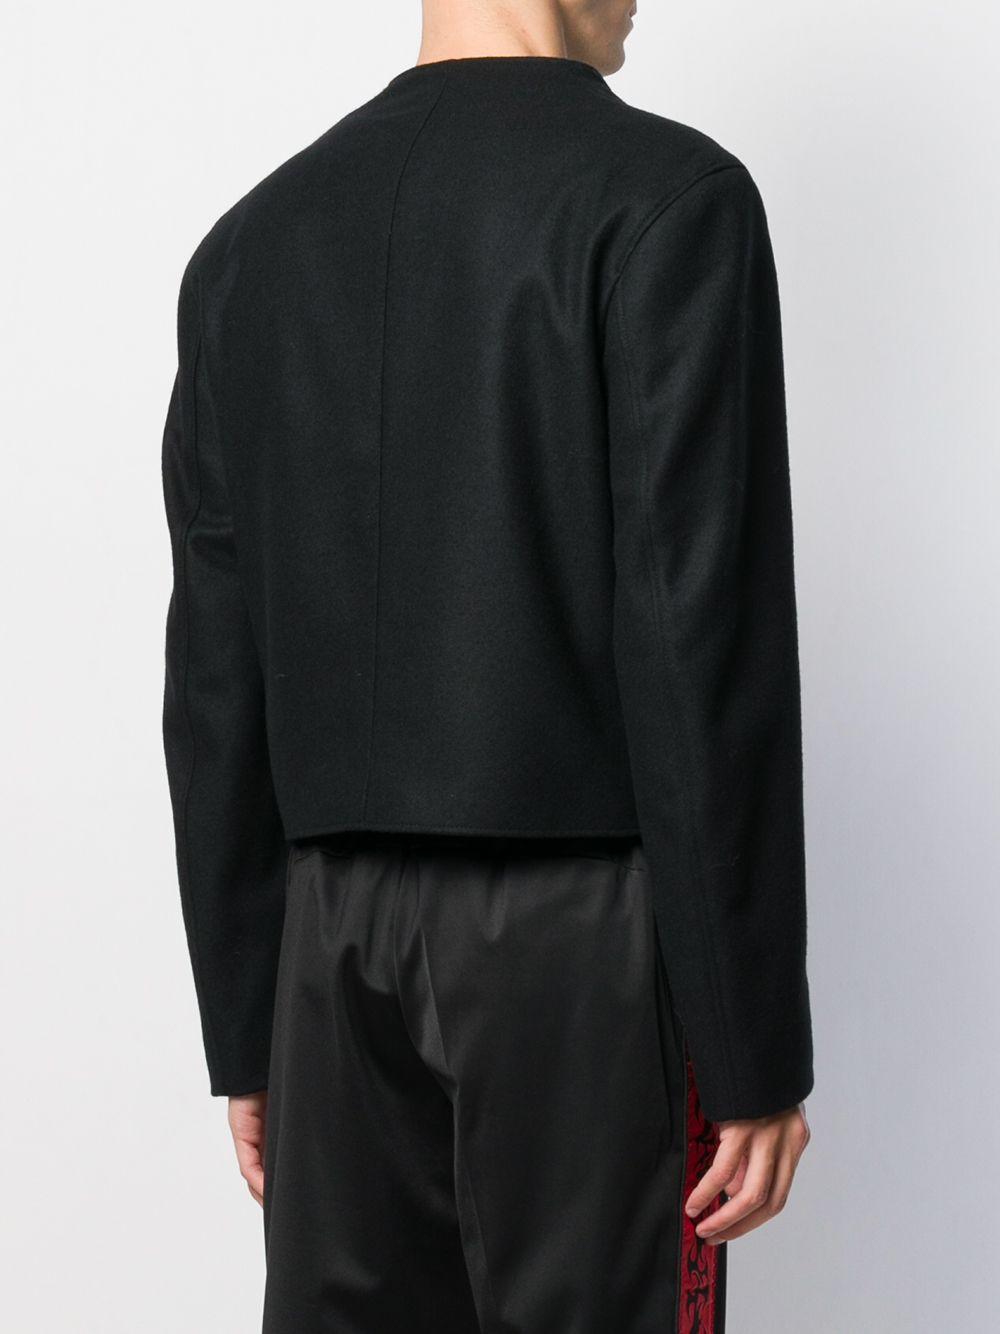 Lemaire Wool Fitted Knit Jacket in Black for Men - Lyst